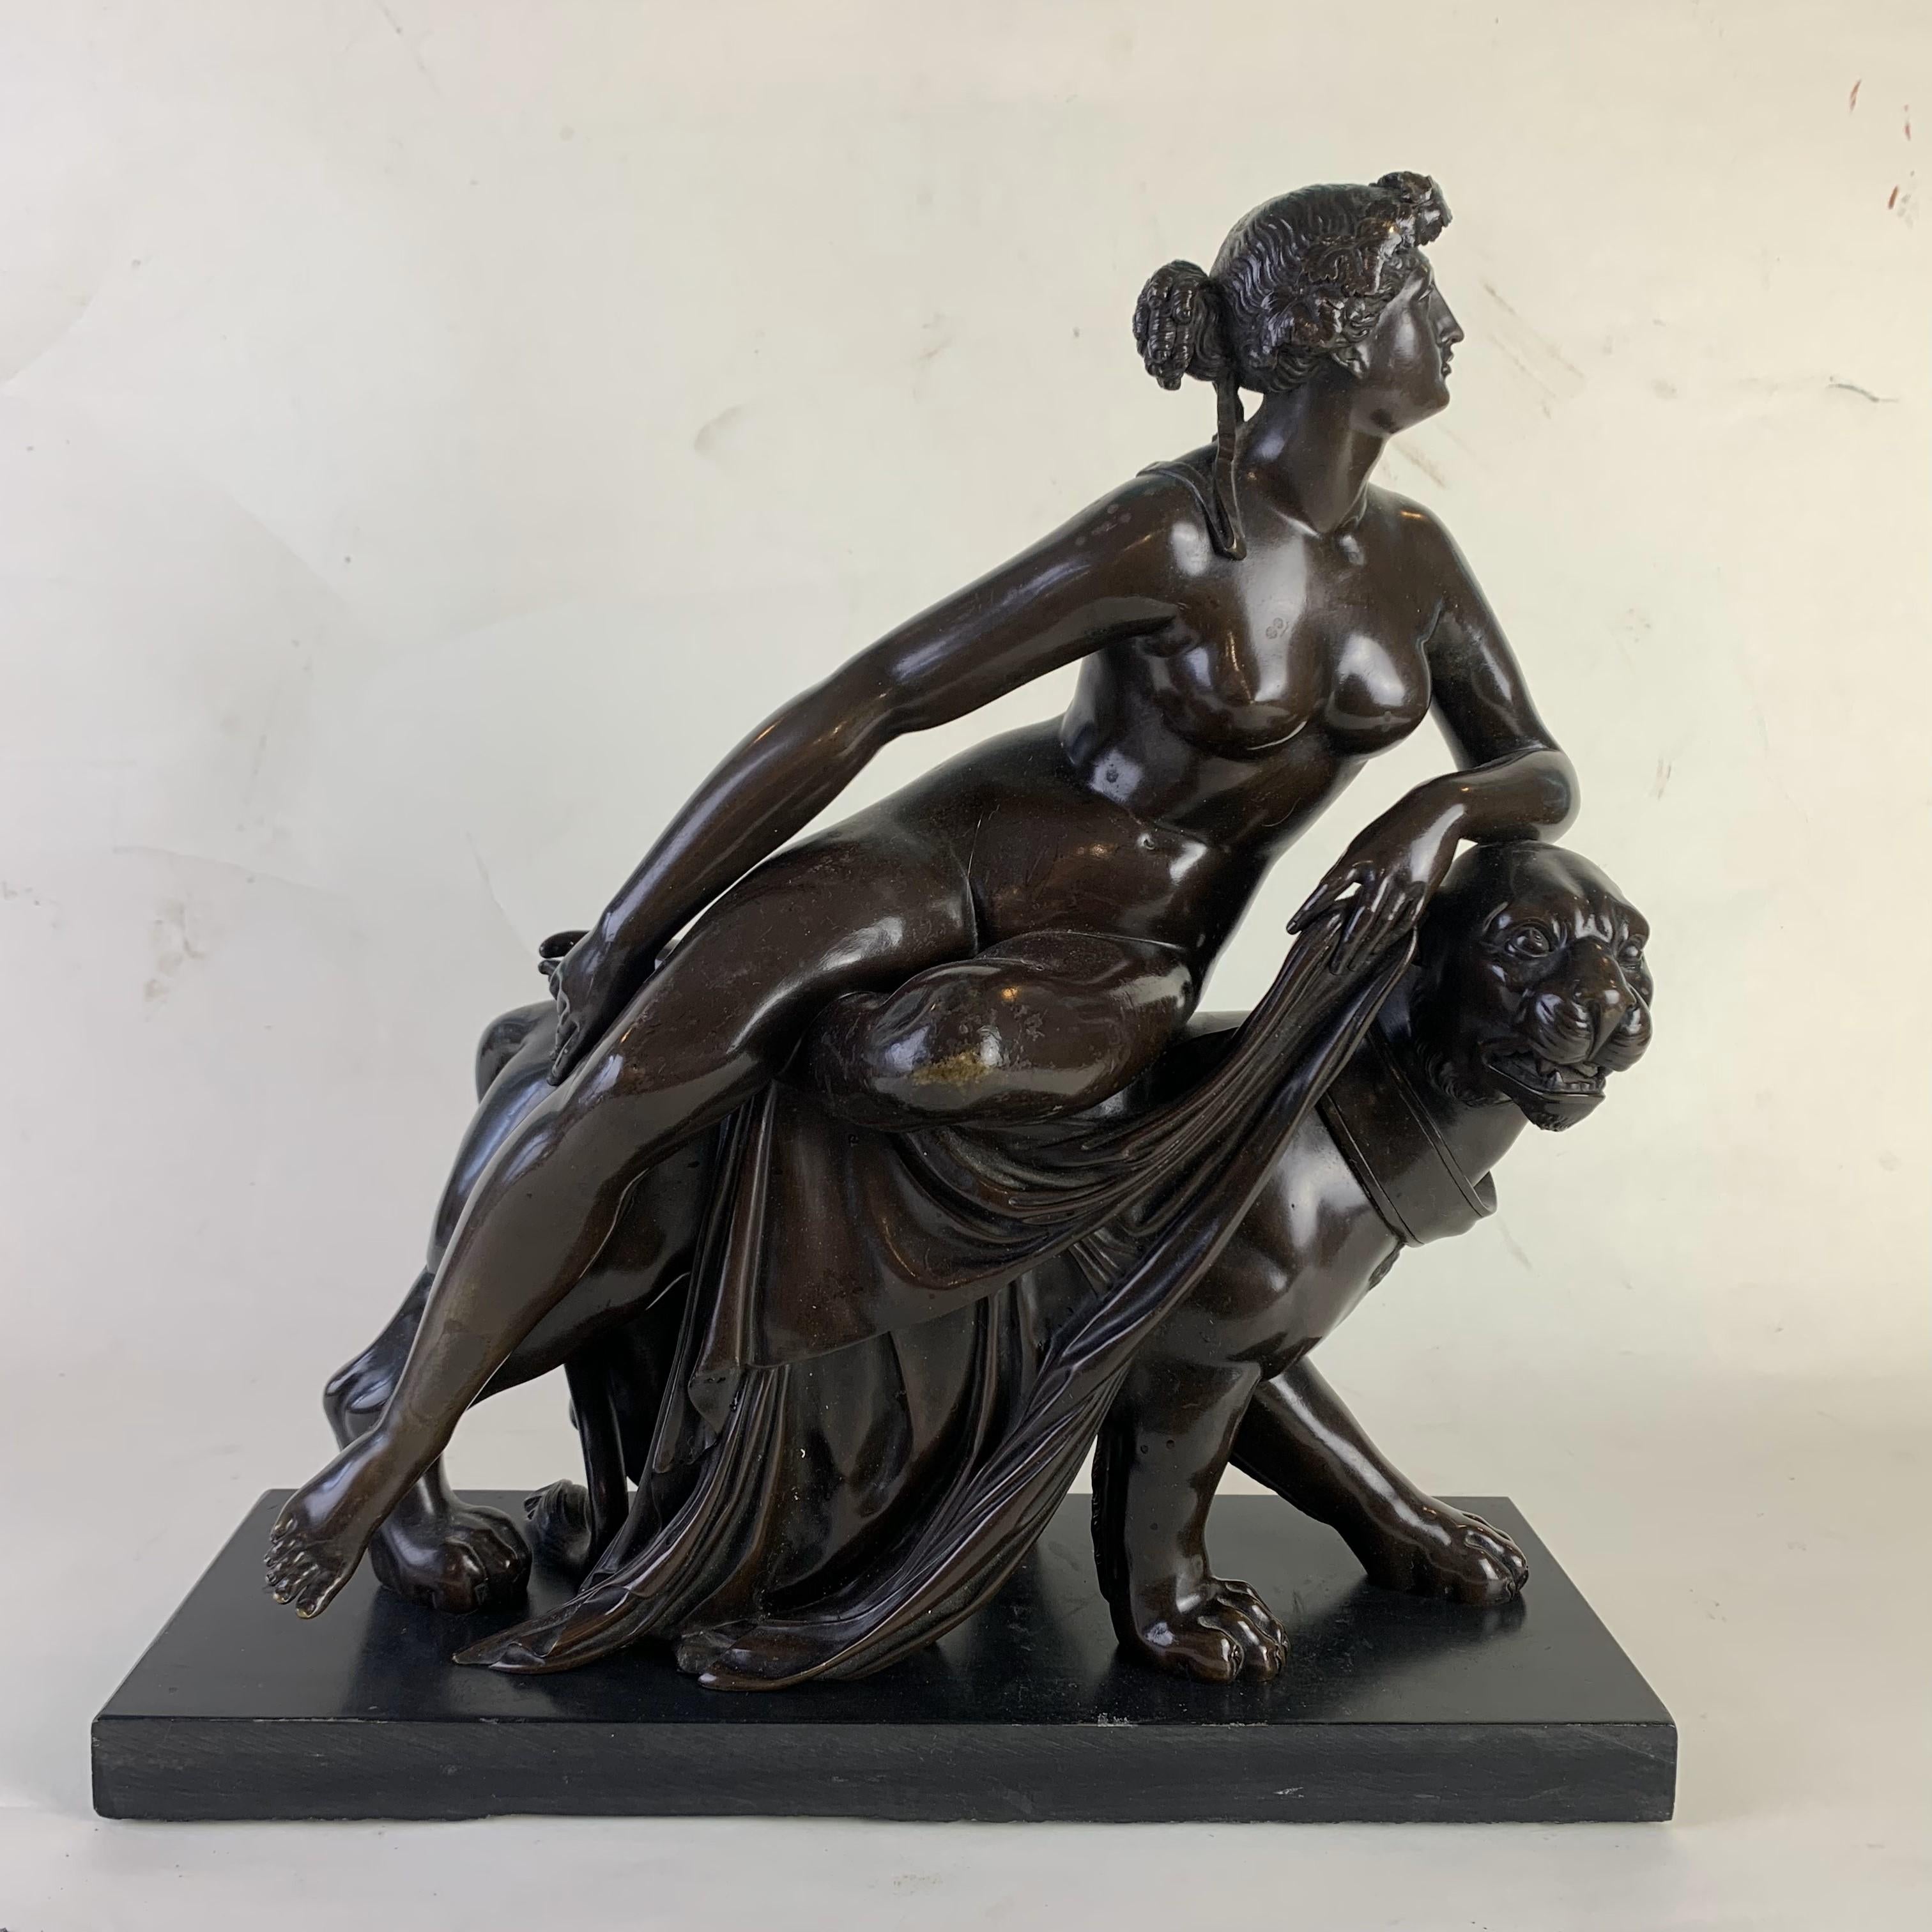 Bronze group of “Ariadne on the Panther’ after the original masterpiece by Johann Heinrich von Danneker. representing the taming of the wilderness by beauty. Ariadne lies naked upon the back of one of Dionysius’ panthers with her cloak draped over